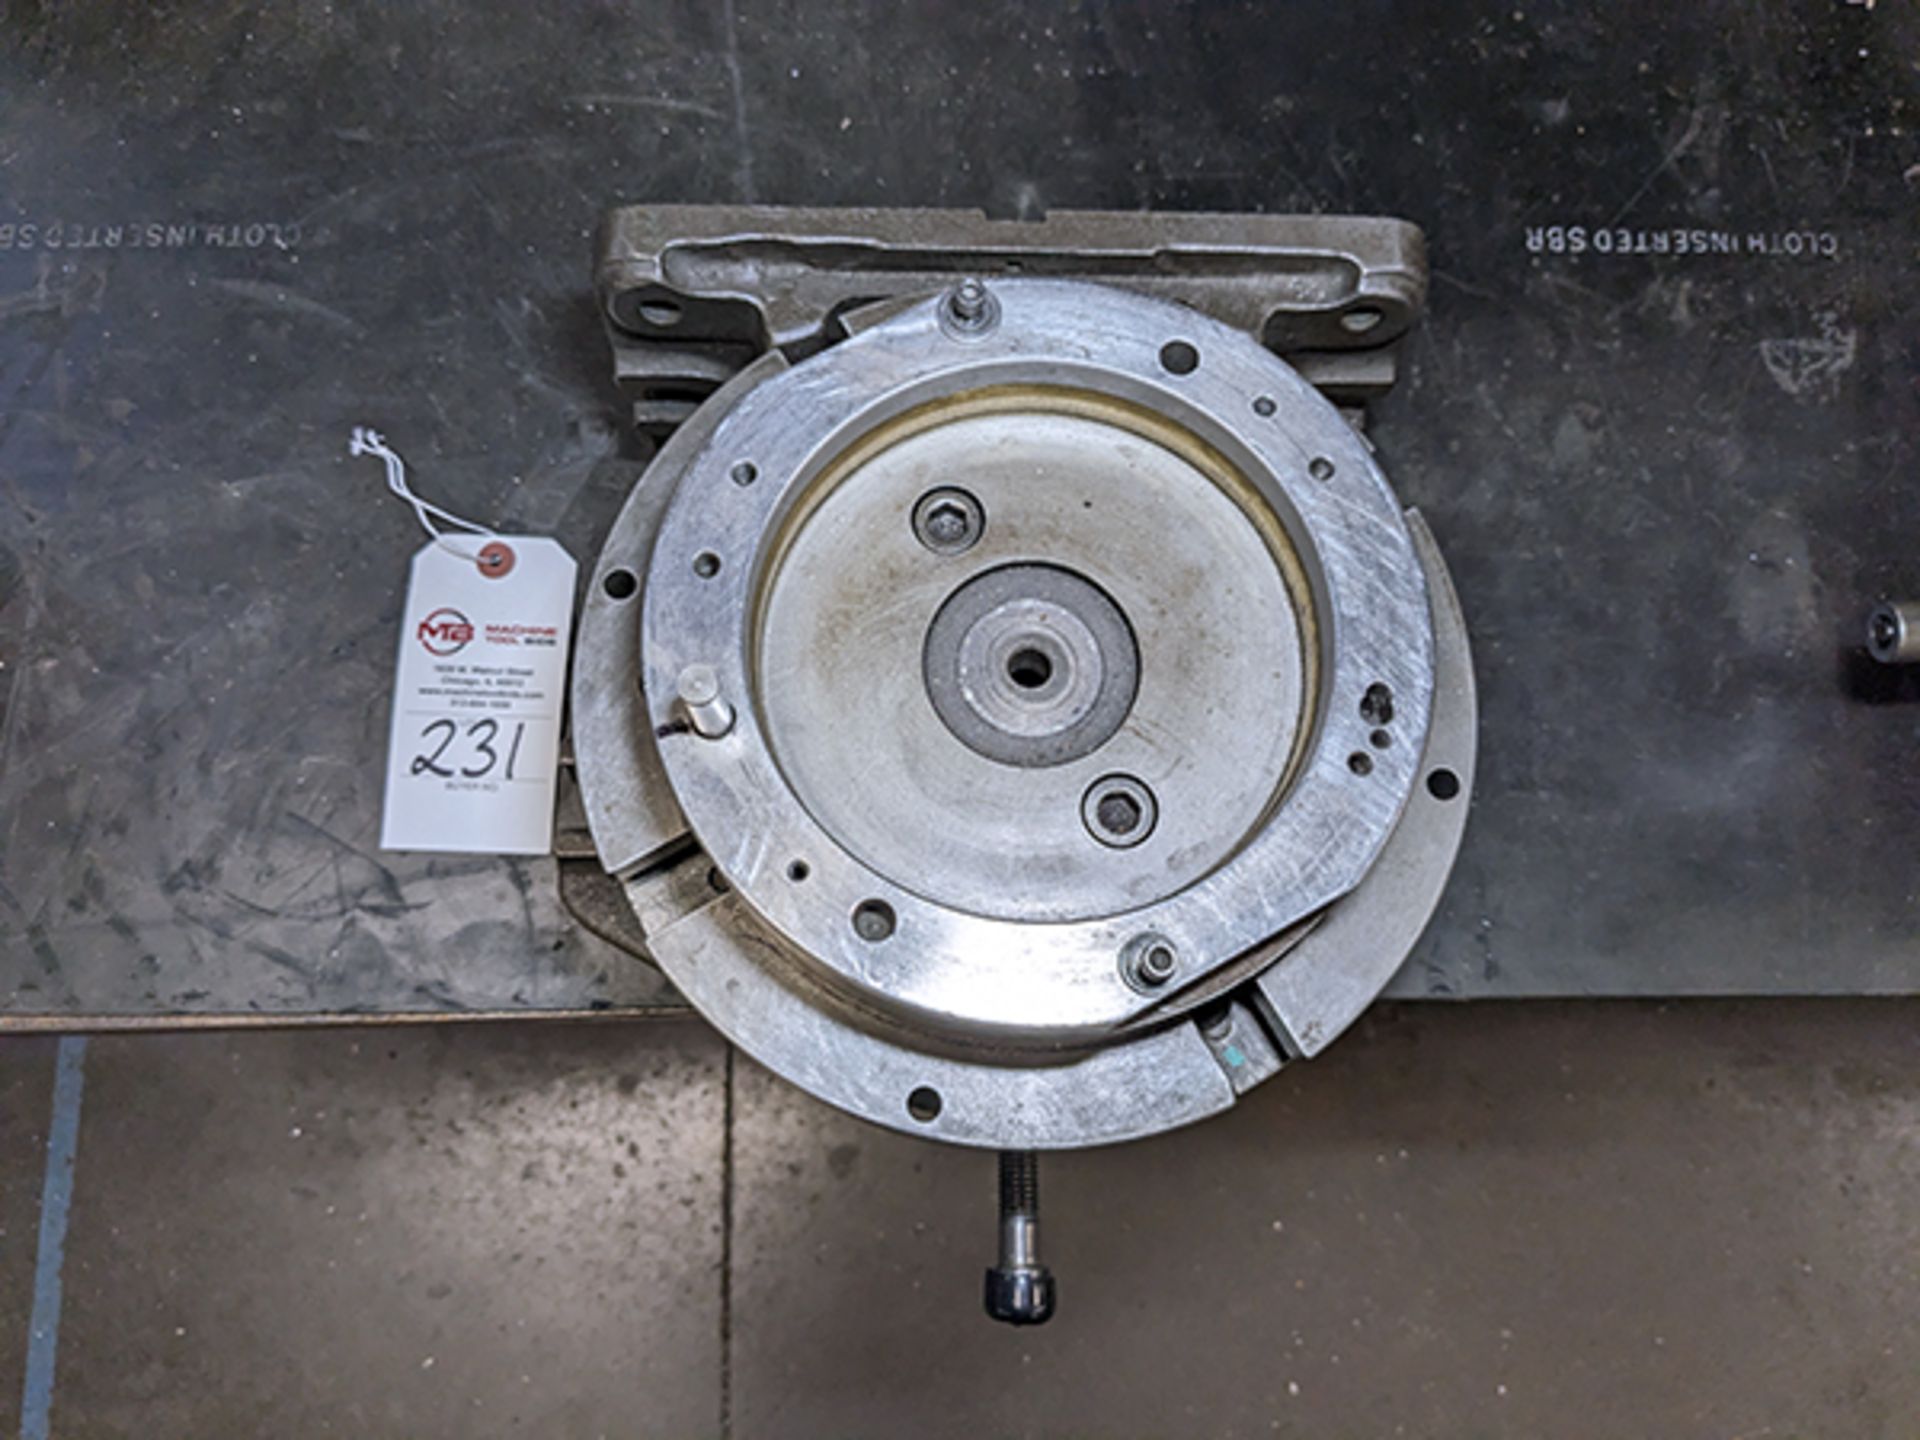 Hartford Super Spacer 10" Indexing Rotary Table - Image 2 of 6